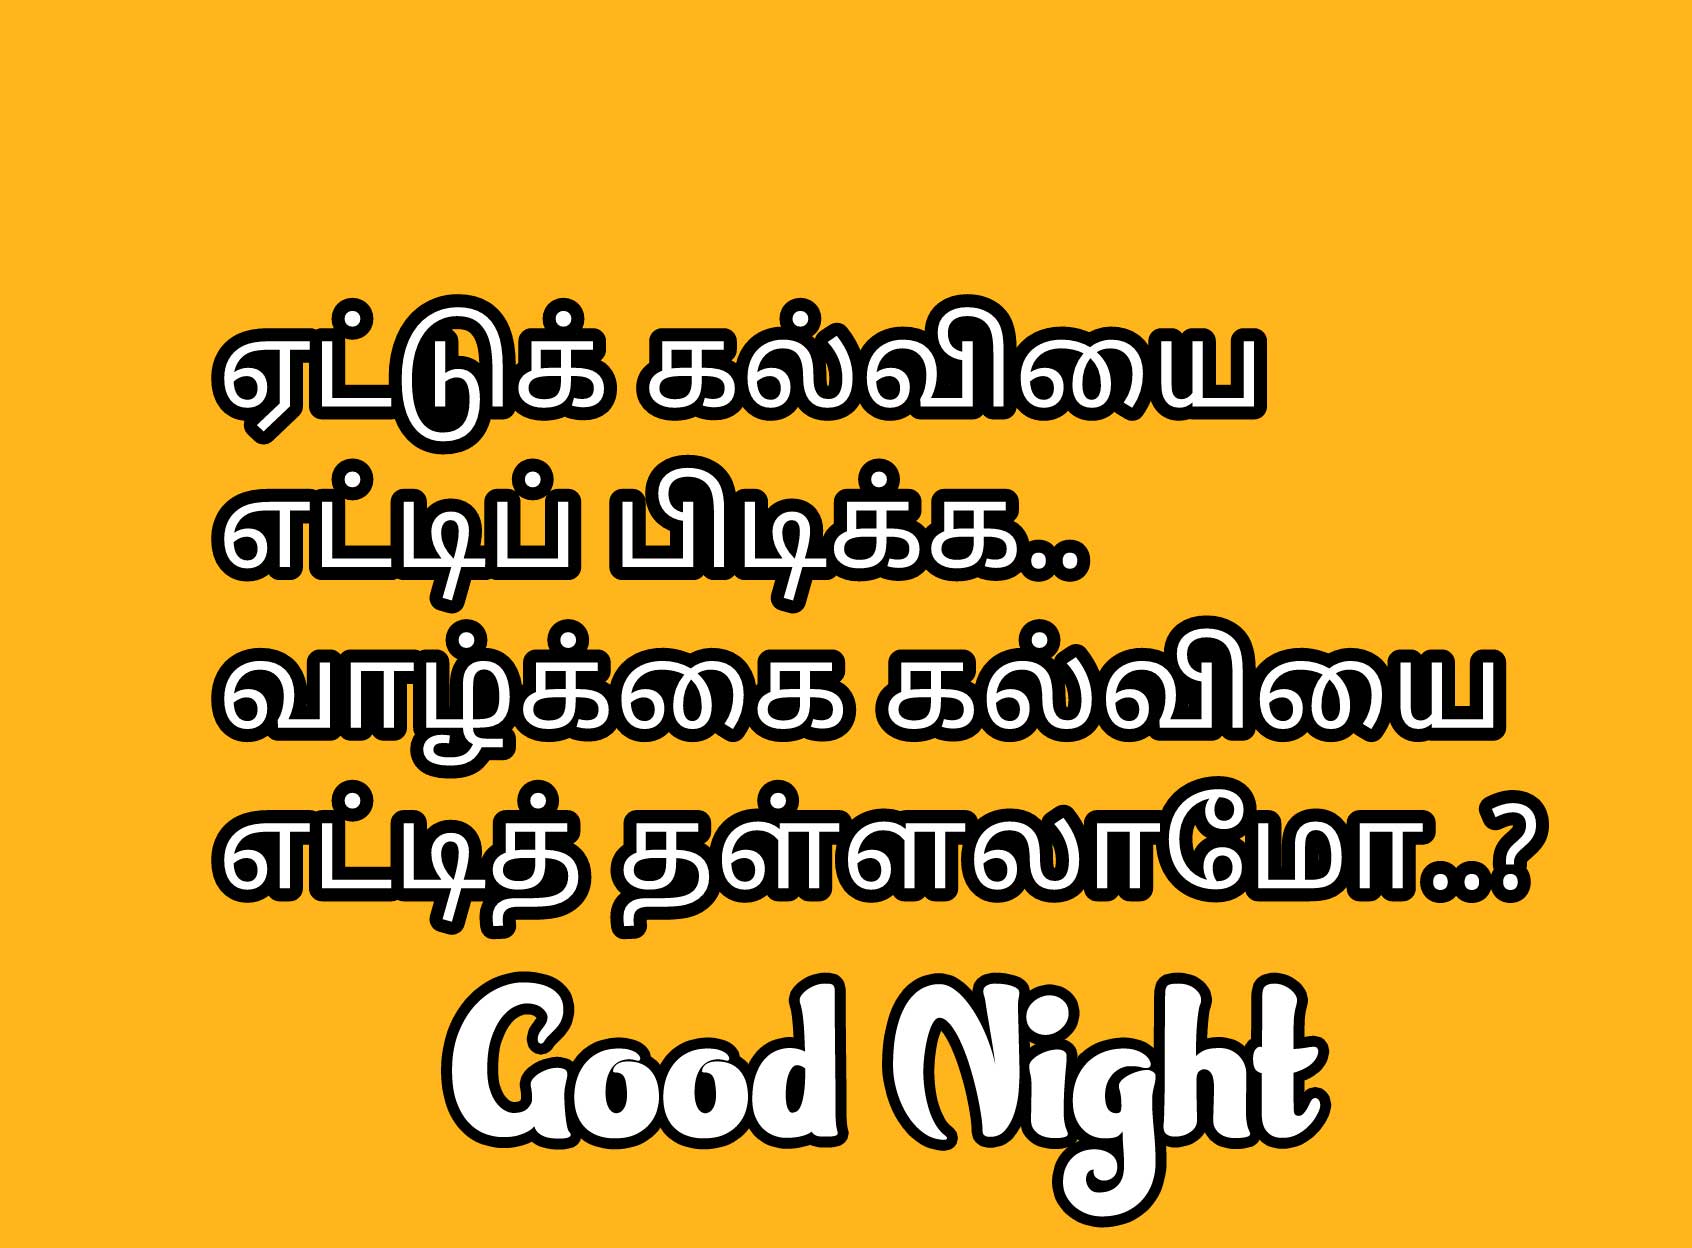  Tamil Good Night Wishes Images Pics photo Download 